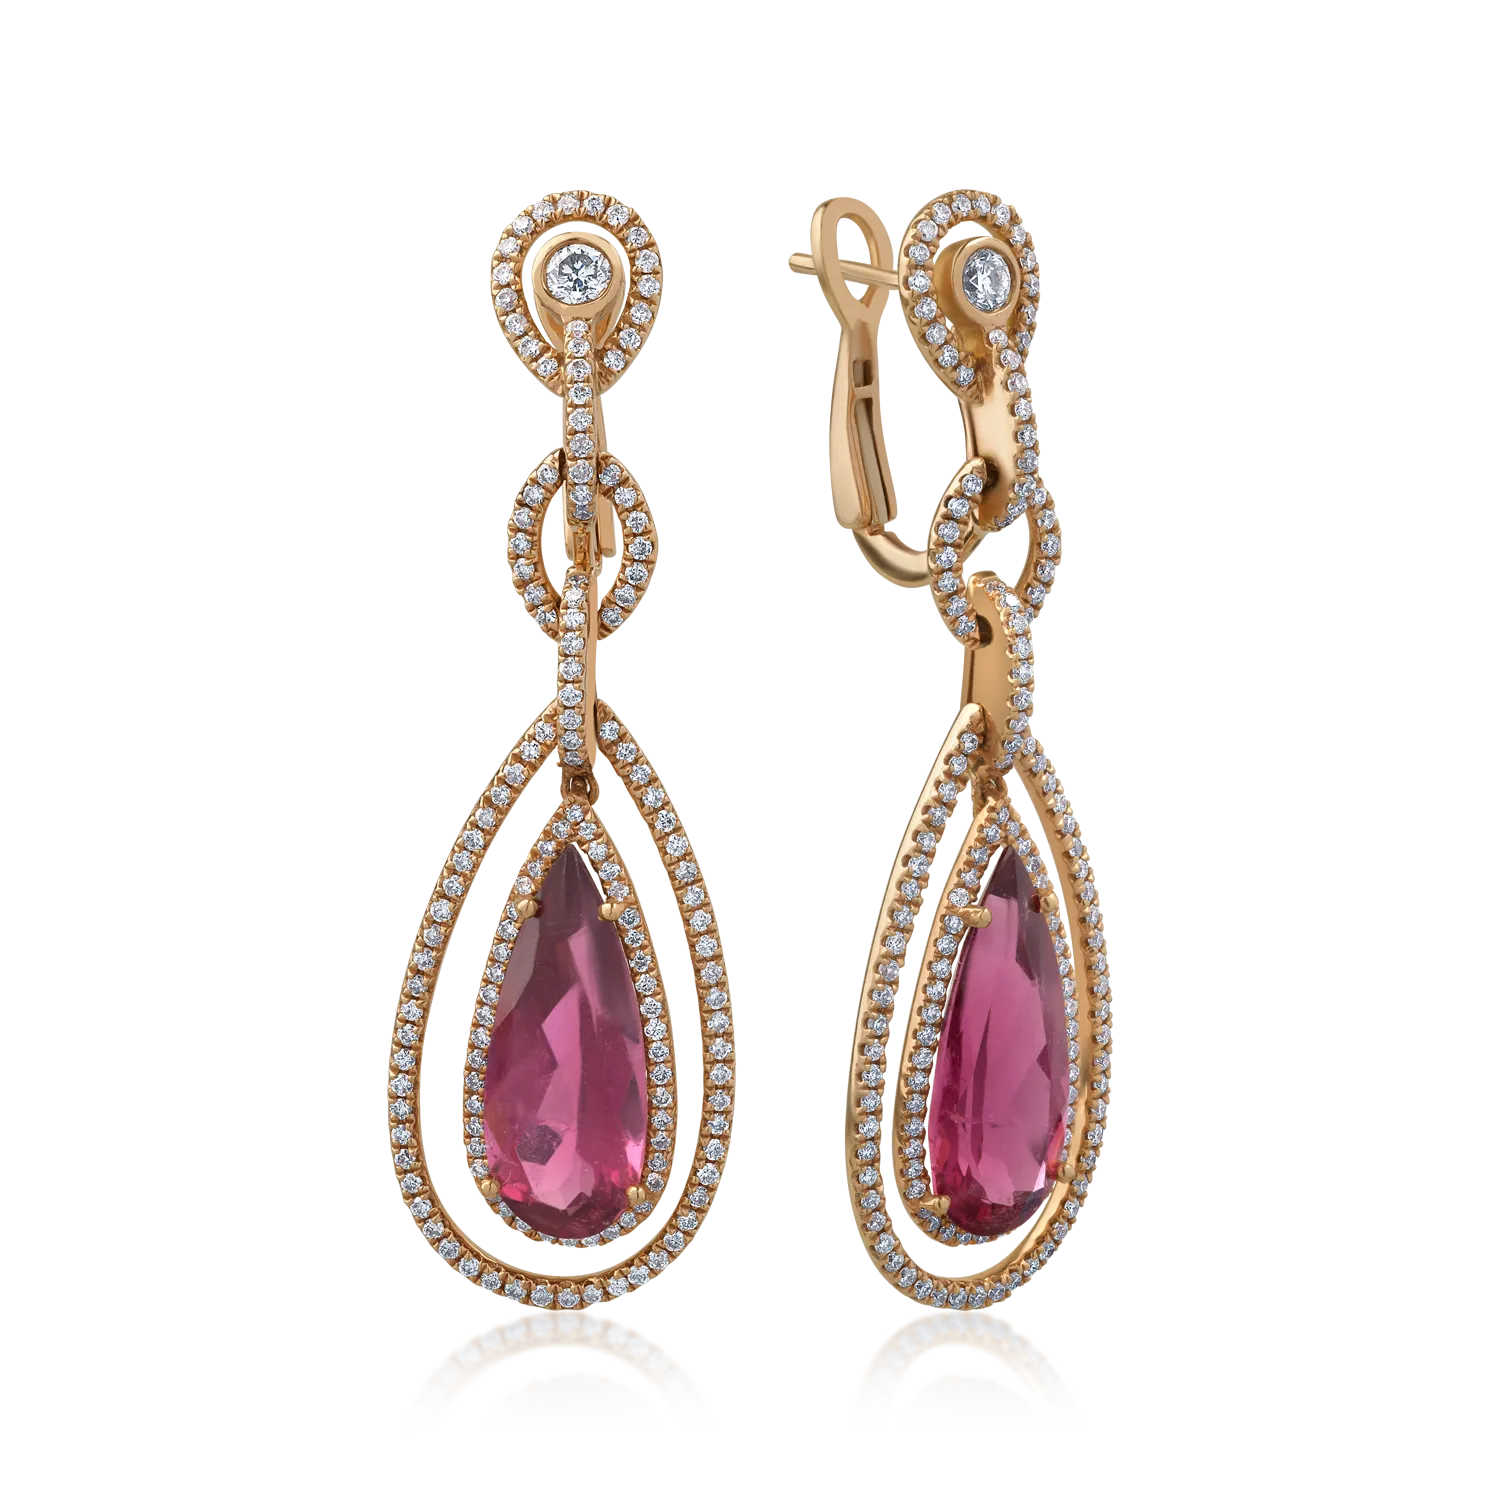 18K rose gold earrings with 6.7ct pink tourmalines and 1.27ct diamonds